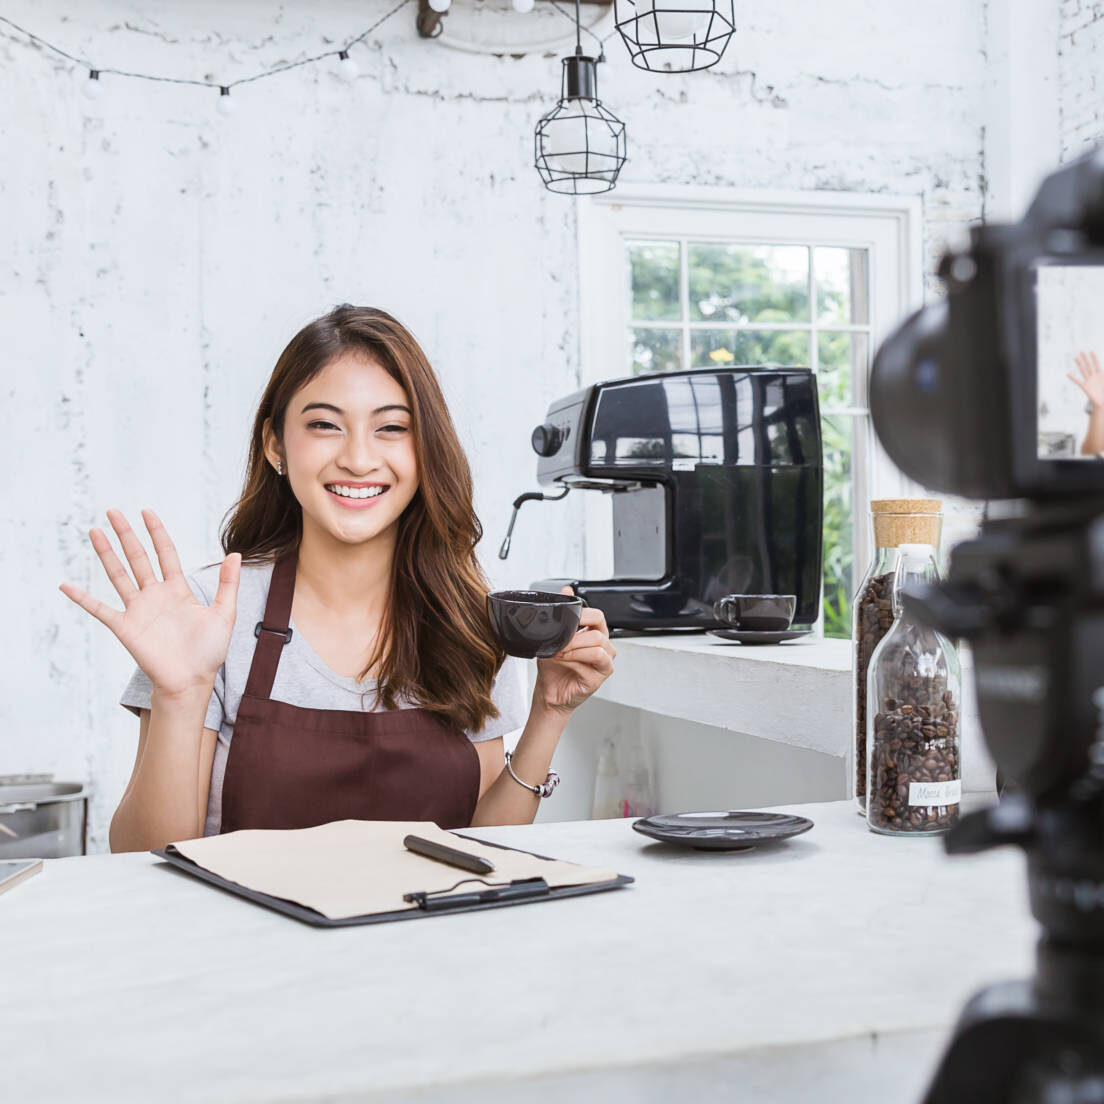 Startup successful small business owner sme beauty girl video online marketing with camera in cafe. Portrait of young asian tan woman barista cafe owner. SME entrepreneur business concept